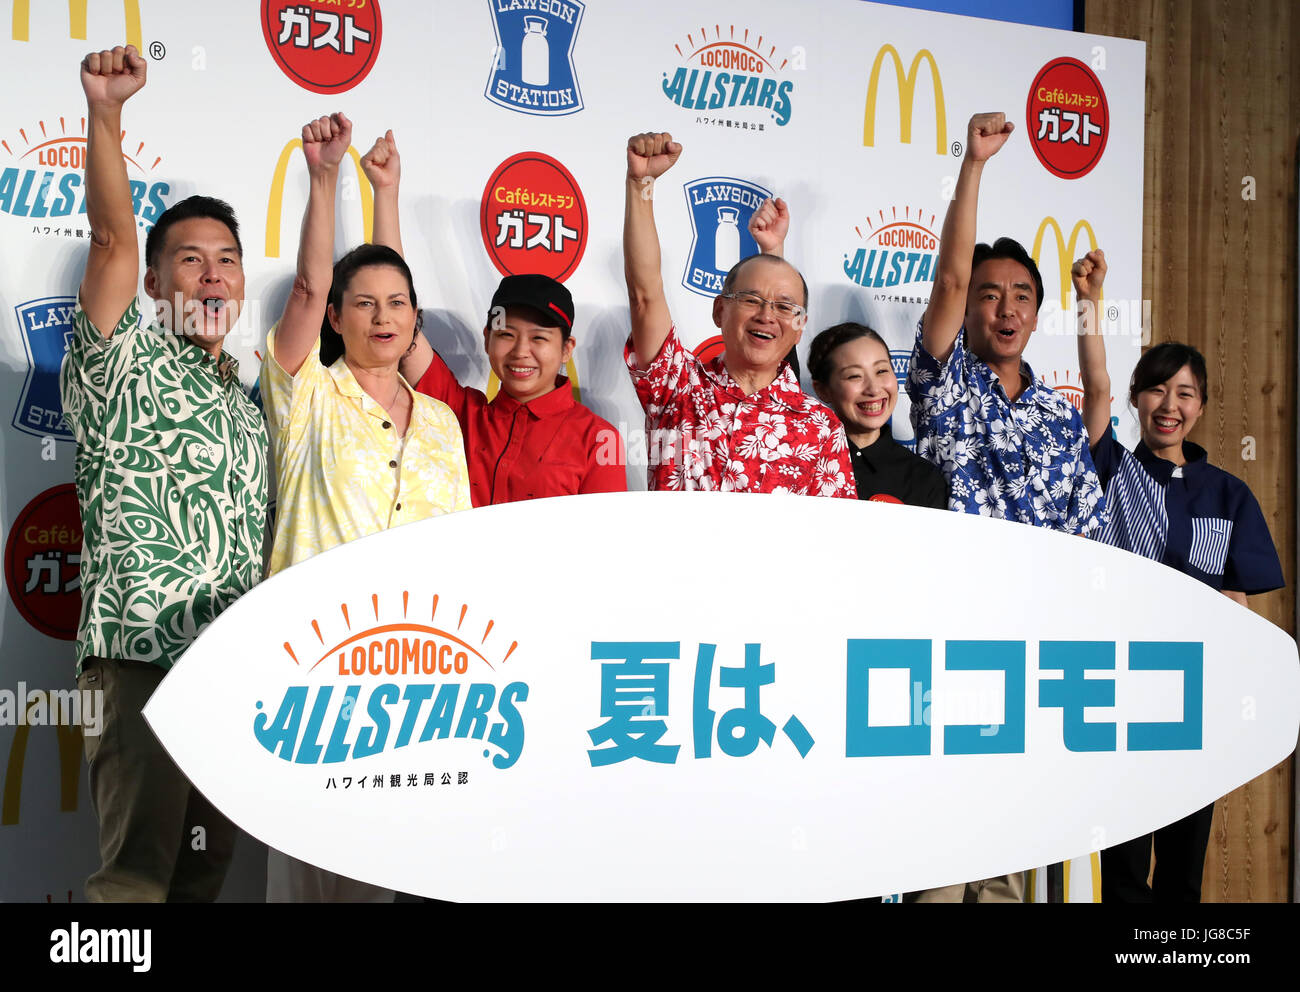 July 4, 2017, Tokyo, Japan - (L-R) Eric Takahata, managing director of Hawaii Tourism Japan, McDonald's Japan president Sarah Casanova, an employee of McDoinald's Japan, Skylark president Makoto Tani, an employee of Gusto restaurant, Lawson president Sadanobu Takemasu and an employee of Lawson convenience store announce that they will collaborate to promote Hawaiian food 'Locomoco' for their restaurants and convenience stores in Japan from July 11 at a presentation in Tokyo on Tuesday, July 4, 2017. McDonald's will provide 'Locomoco' burger and Gusto restaurant chain will provide 'Cheese in Lo Stock Photo